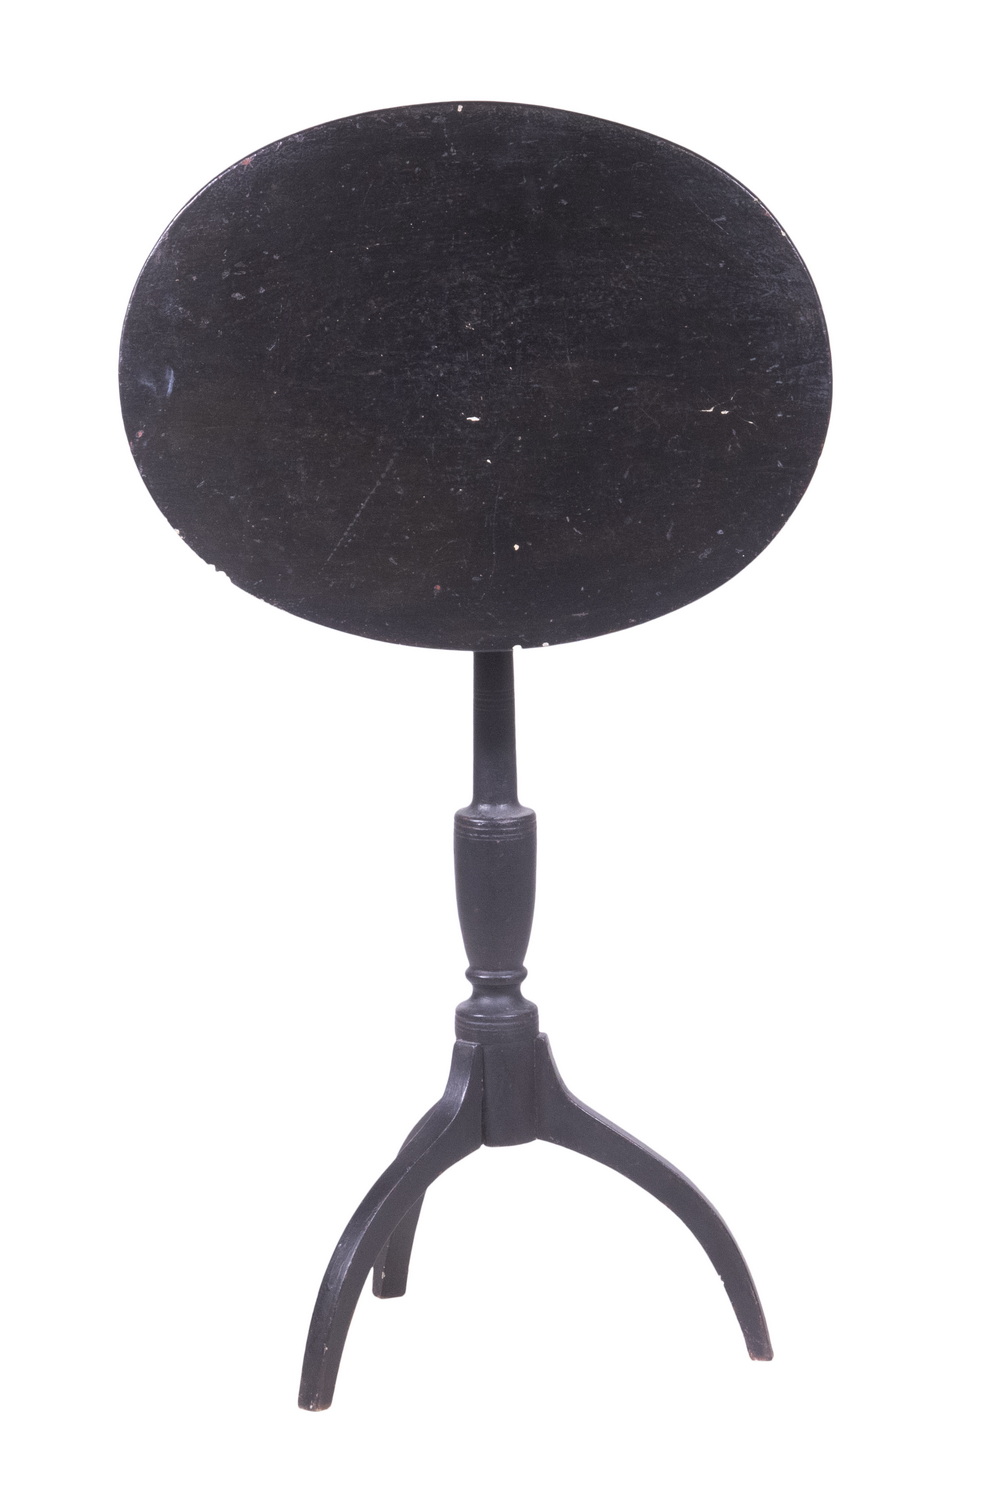 OVAL PAINTED CANDLESTAND Tilt-Top